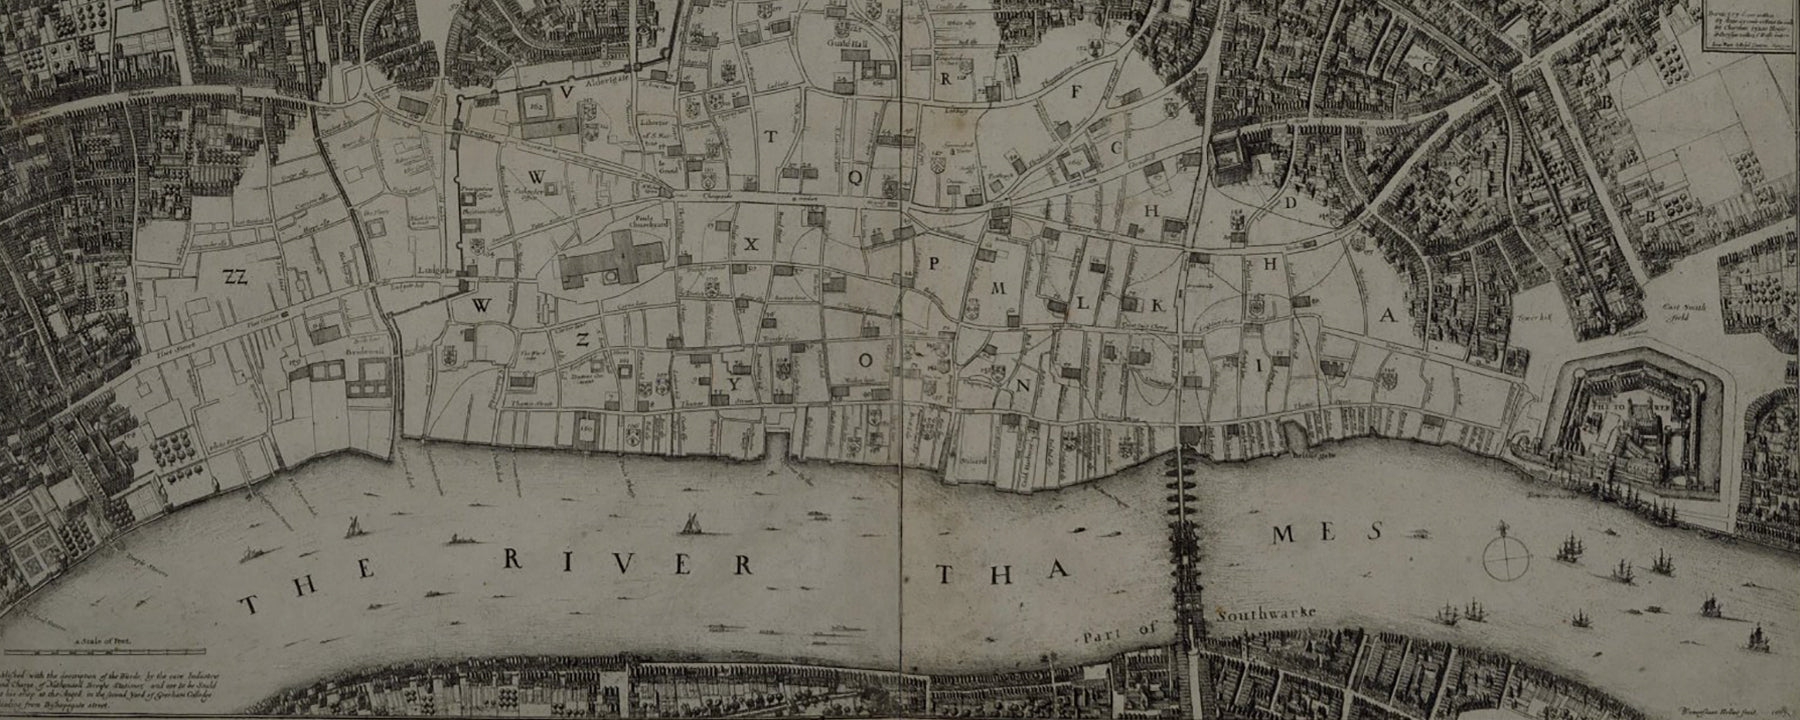 A faded old monochrome map of the City of London